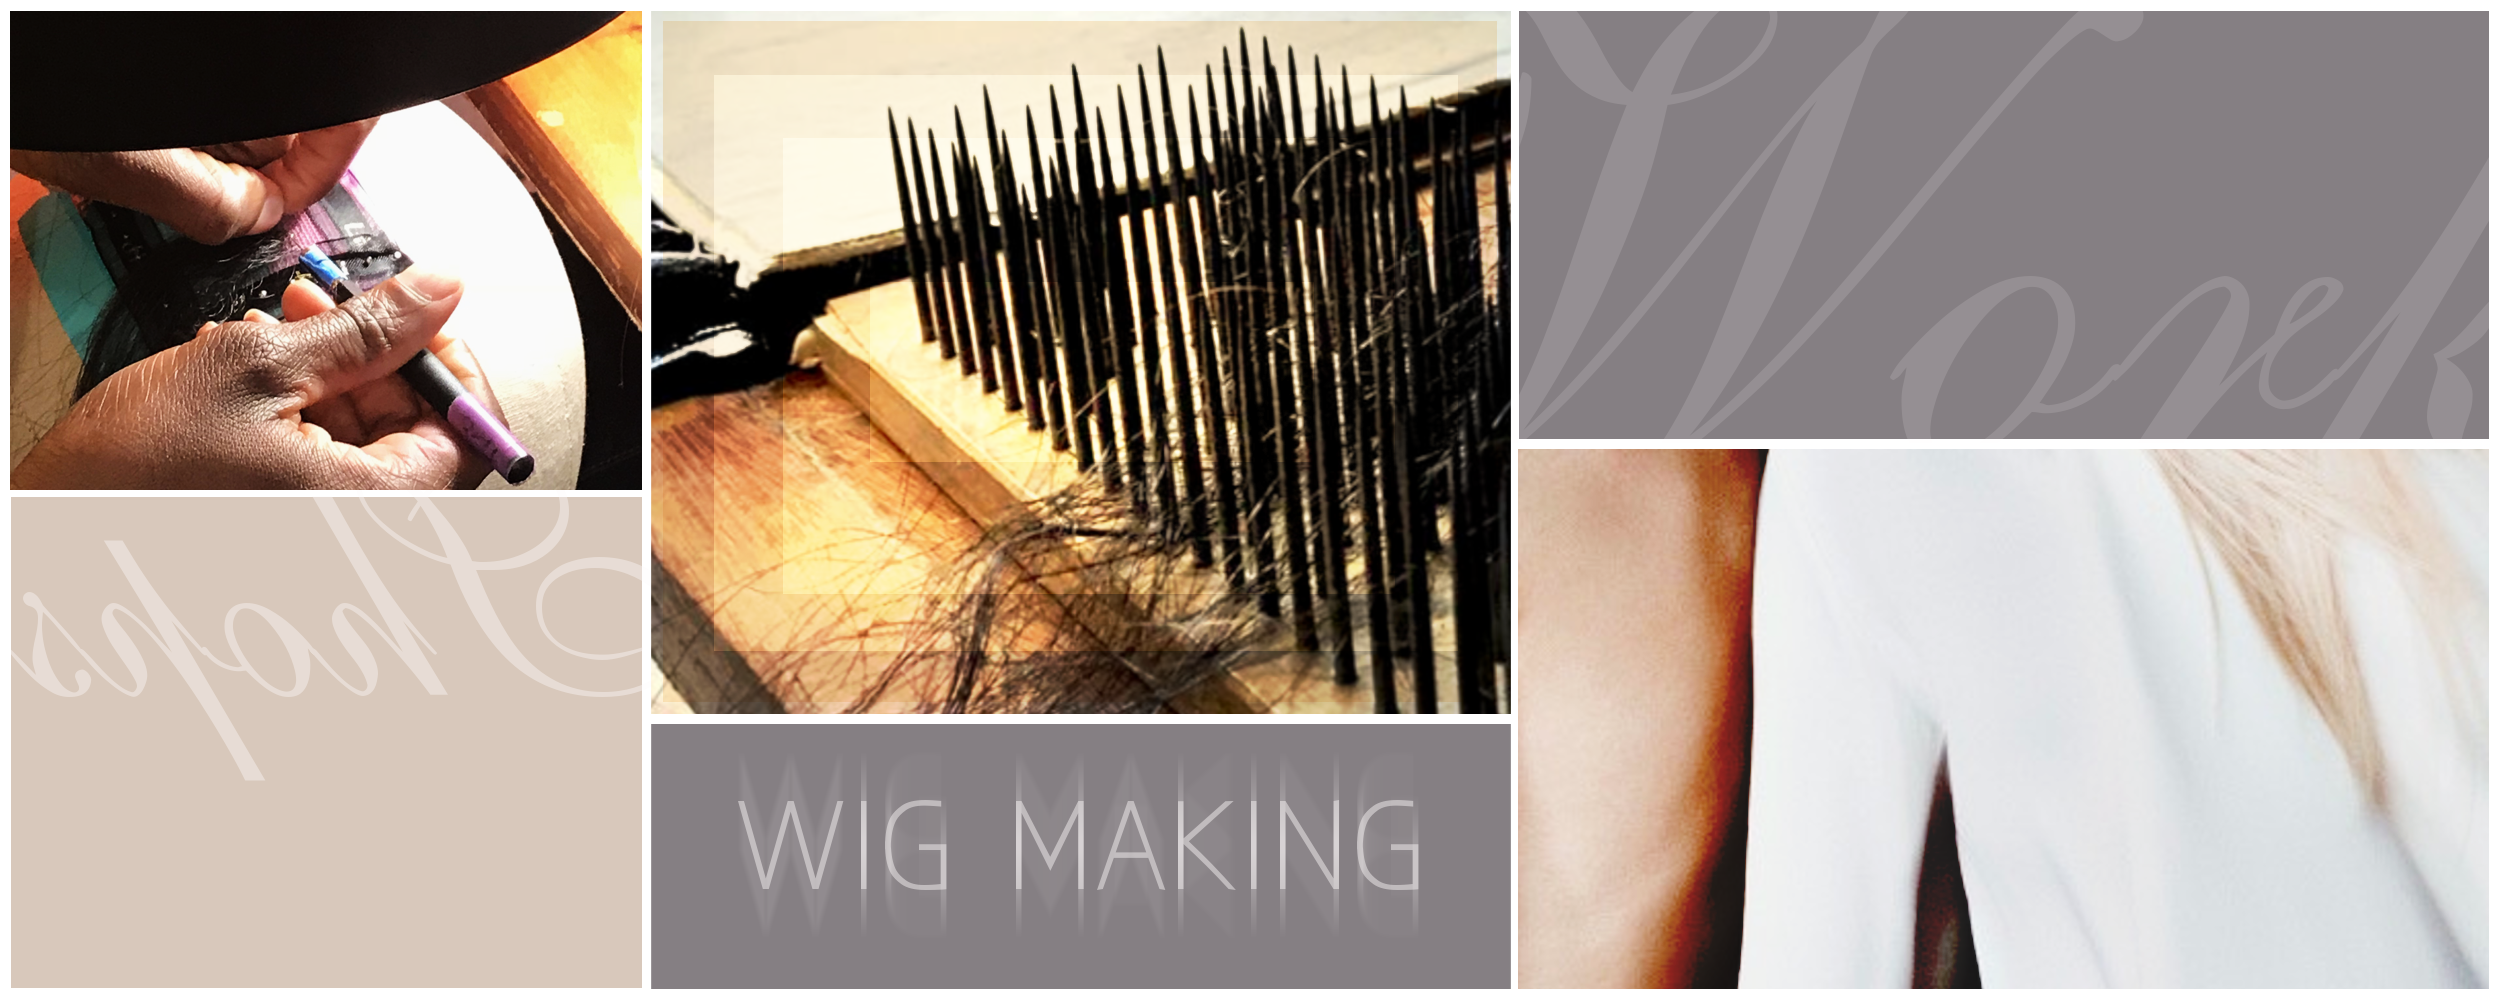 Where to Use Your Wig Making and Hair Ventilation Skills